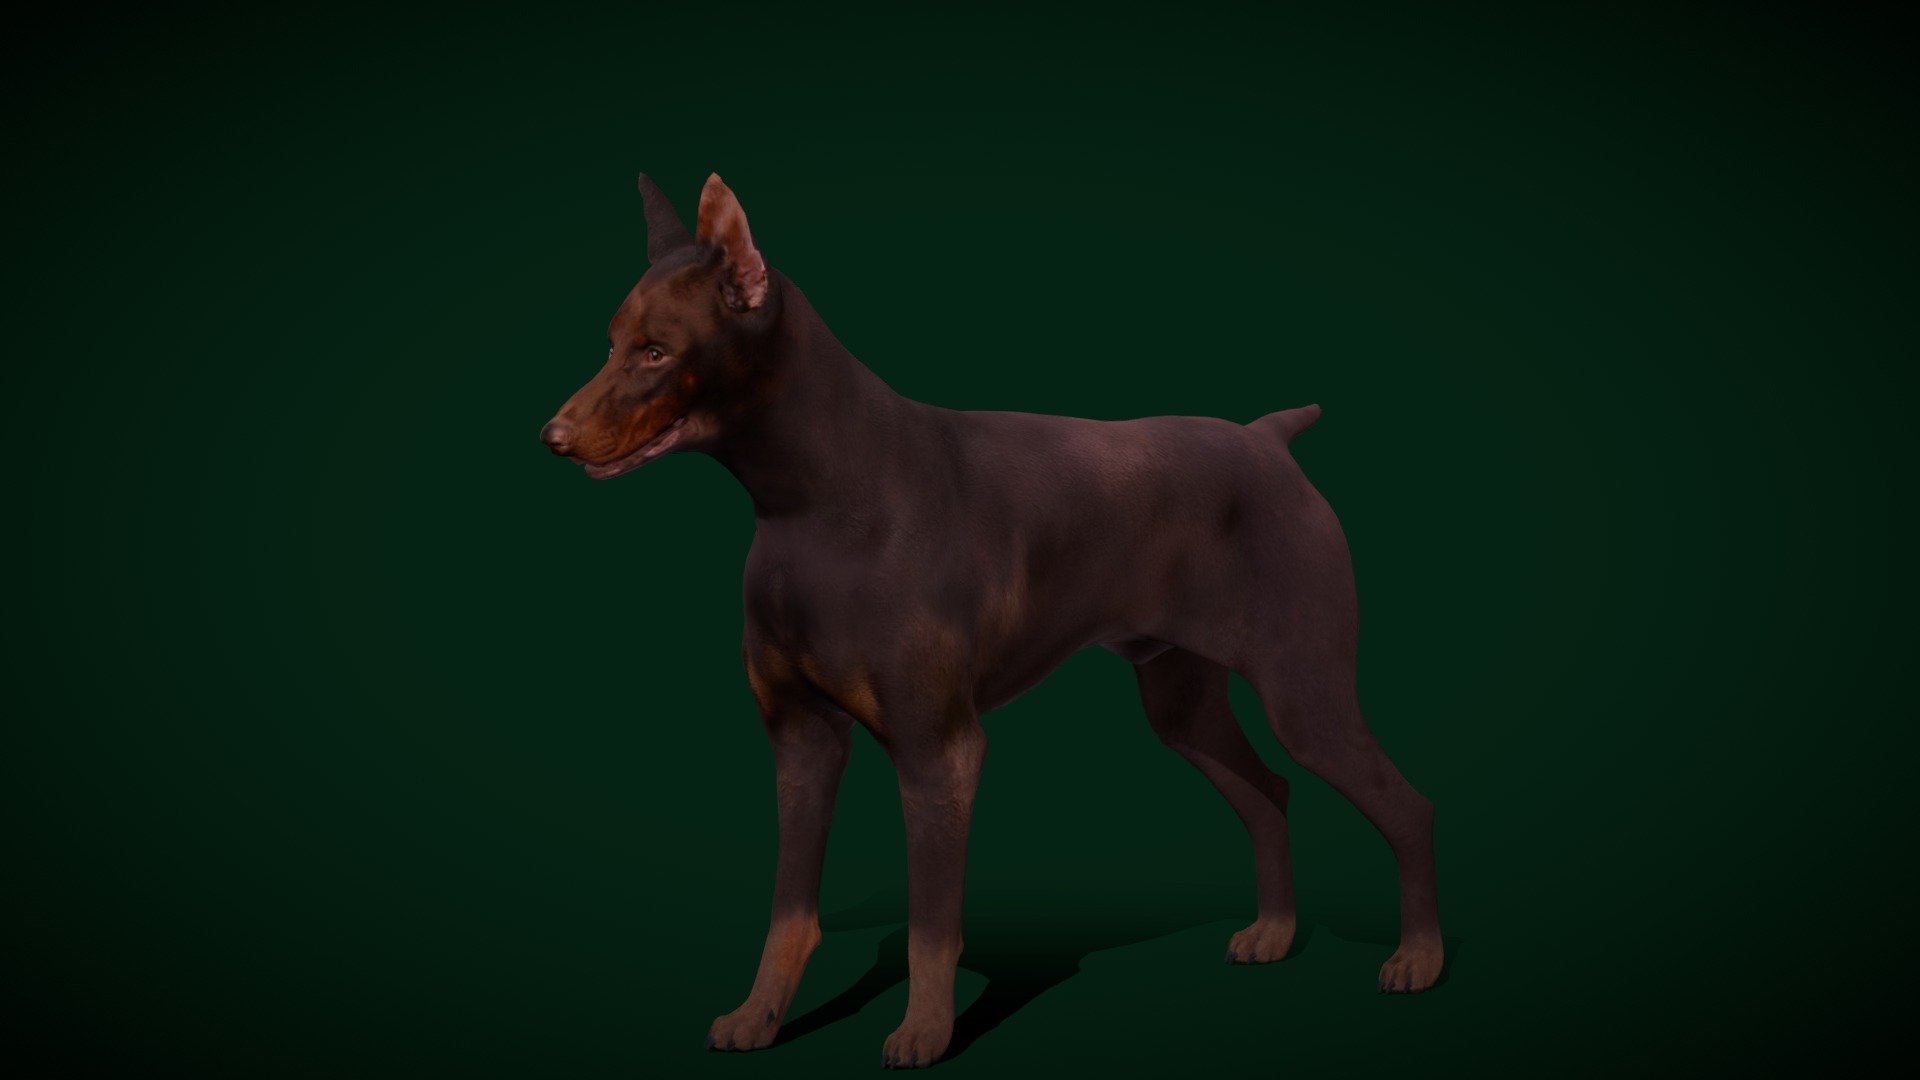 Red Dobermann Pinscher Dog Breed (Doberman)Canine,Germany Breed 

Canis lupus familiaris Animal Mammal(Family Dog)Pet,cute,Domestic Dog

1 Draw Calls

MidPoly 

Game Ready (Character)

Subdivision Surface Ready

10- Animations 

4K PBR Textures Material

Unreal/Unity FBX 

Blend File 3.6.5 LTS / 4

USDZ File (AR Ready). Real Scale Dimension (Xcode ,Reality Composer, Keynote Ready)

Textures Files

GLB File (Unreal 5.1 Plus Native Support)


Gltf File ( Spark AR, Lens Studio(SnapChat) , Effector(Tiktok) , Spline, Play Canvas,Omiverse ) Compatible




Triangles -53068



Faces -28682

Edges -55750

Vertices -27117

Diffuse, Metallic, Roughness , Normal Map ,Specular Map,AO
 
The Dobermann is a German breed of medium-large domestic dog of pinscher type. It was originally bred in Thuringia in about 1890 by Louis Dobermann, a tax collector.a long muzzle and – ideally – an even  graceful gait.The Doberman Pinscher,  the Doberman, is a medium to large dog breed - Dobermann Pinscher Dog Breed (Game Ready) - Buy Royalty Free 3D model by Nyilonelycompany 3d model